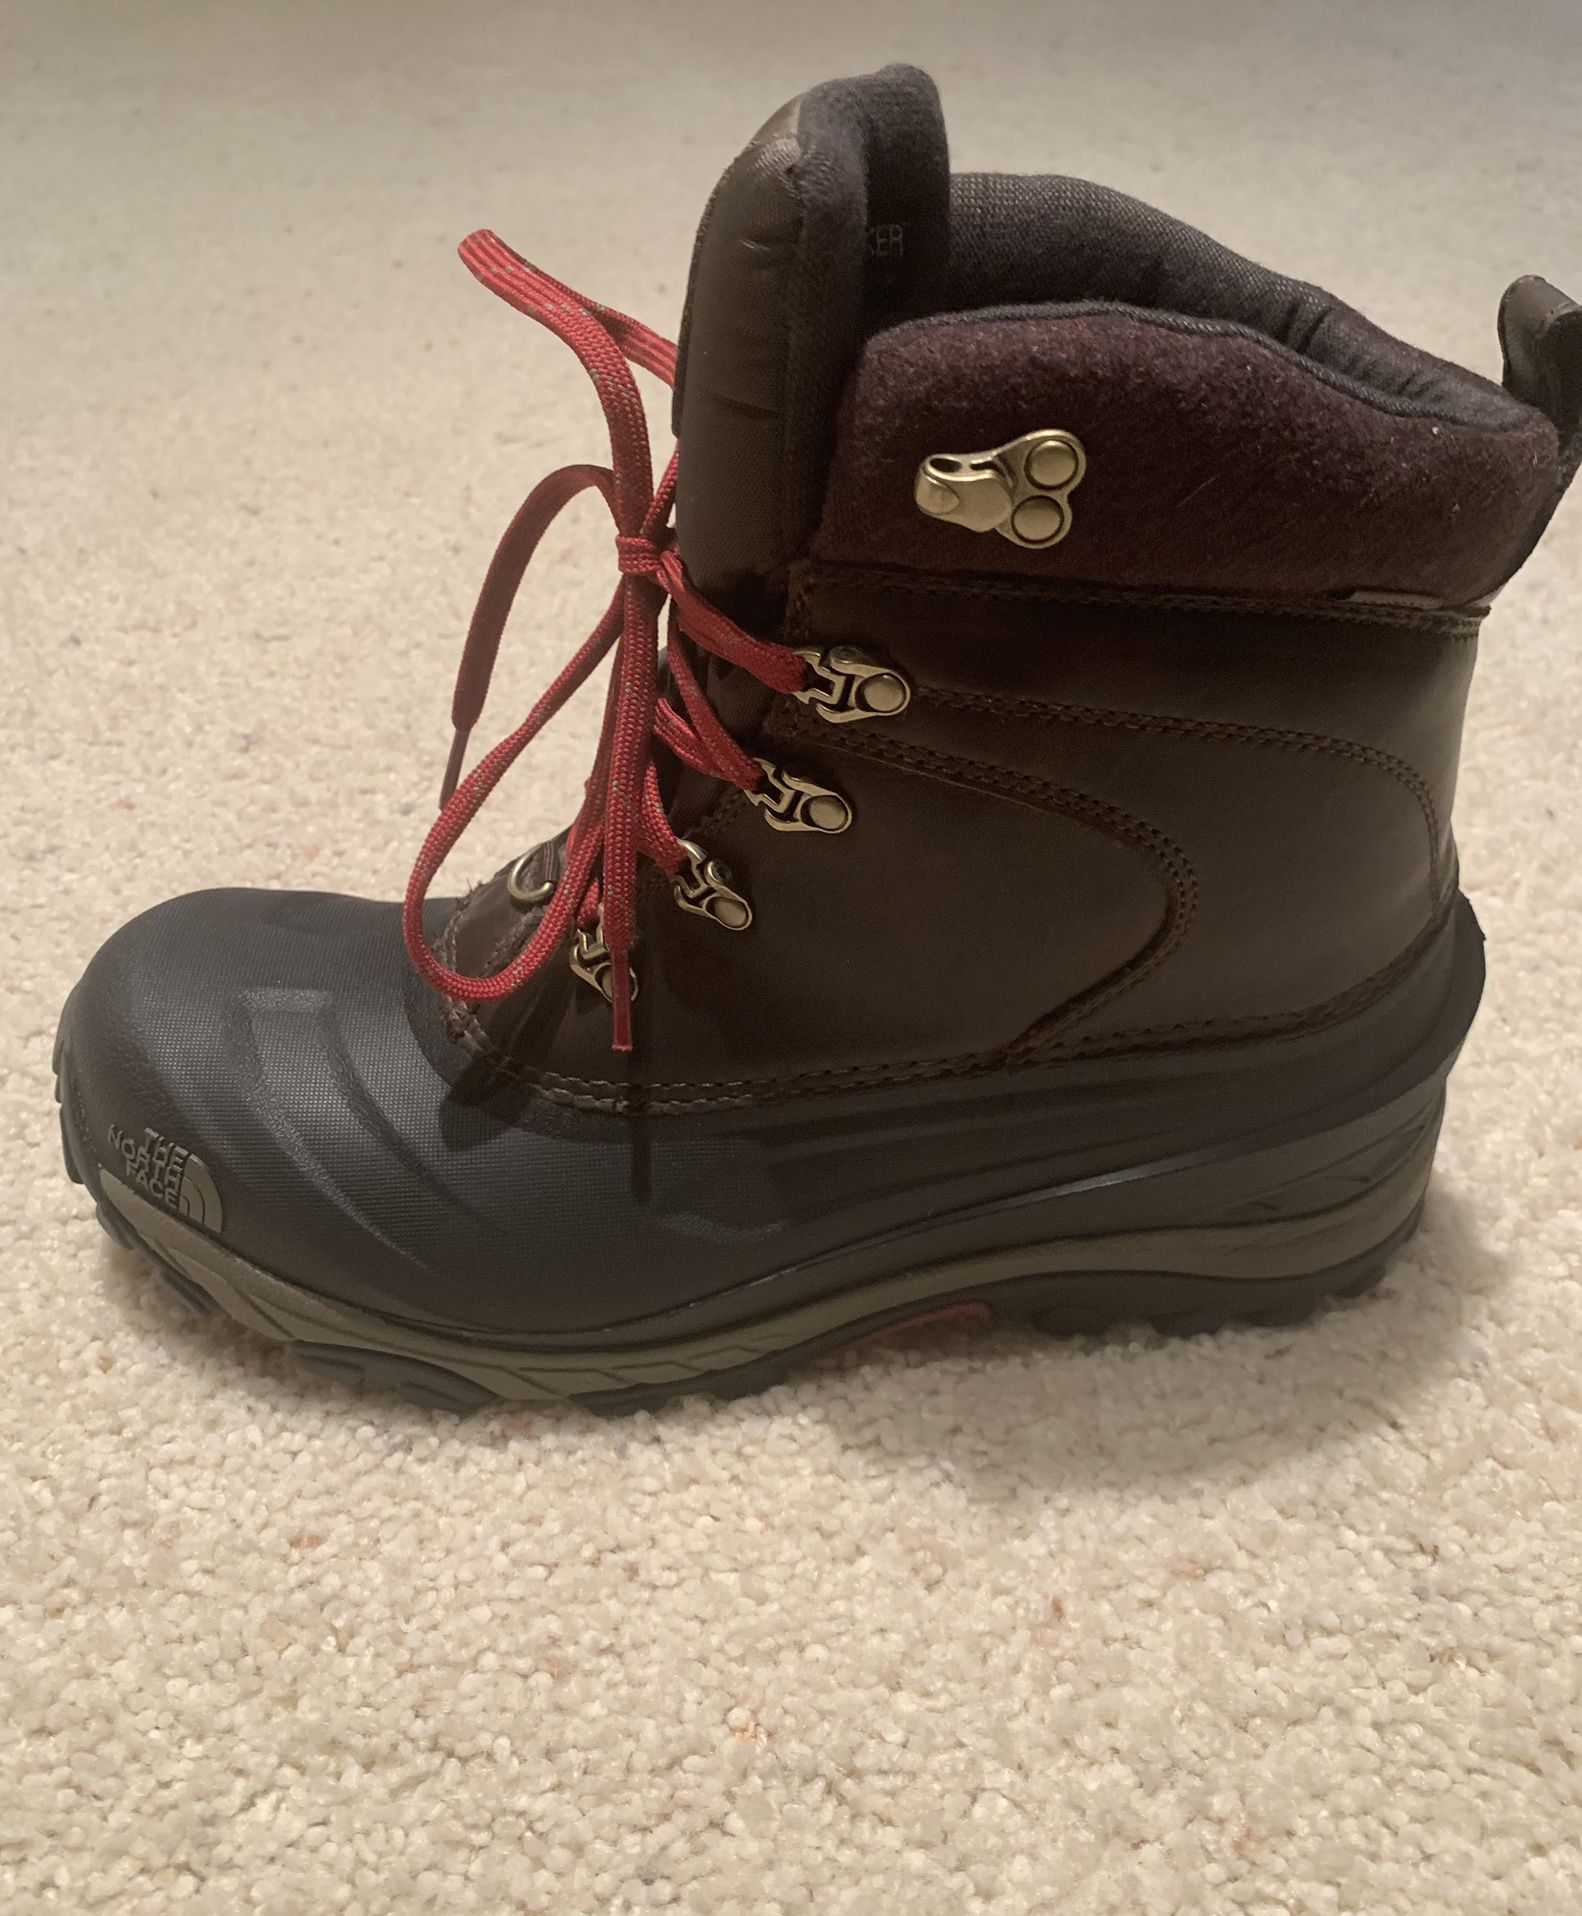 North Face Winter Insulated Boots